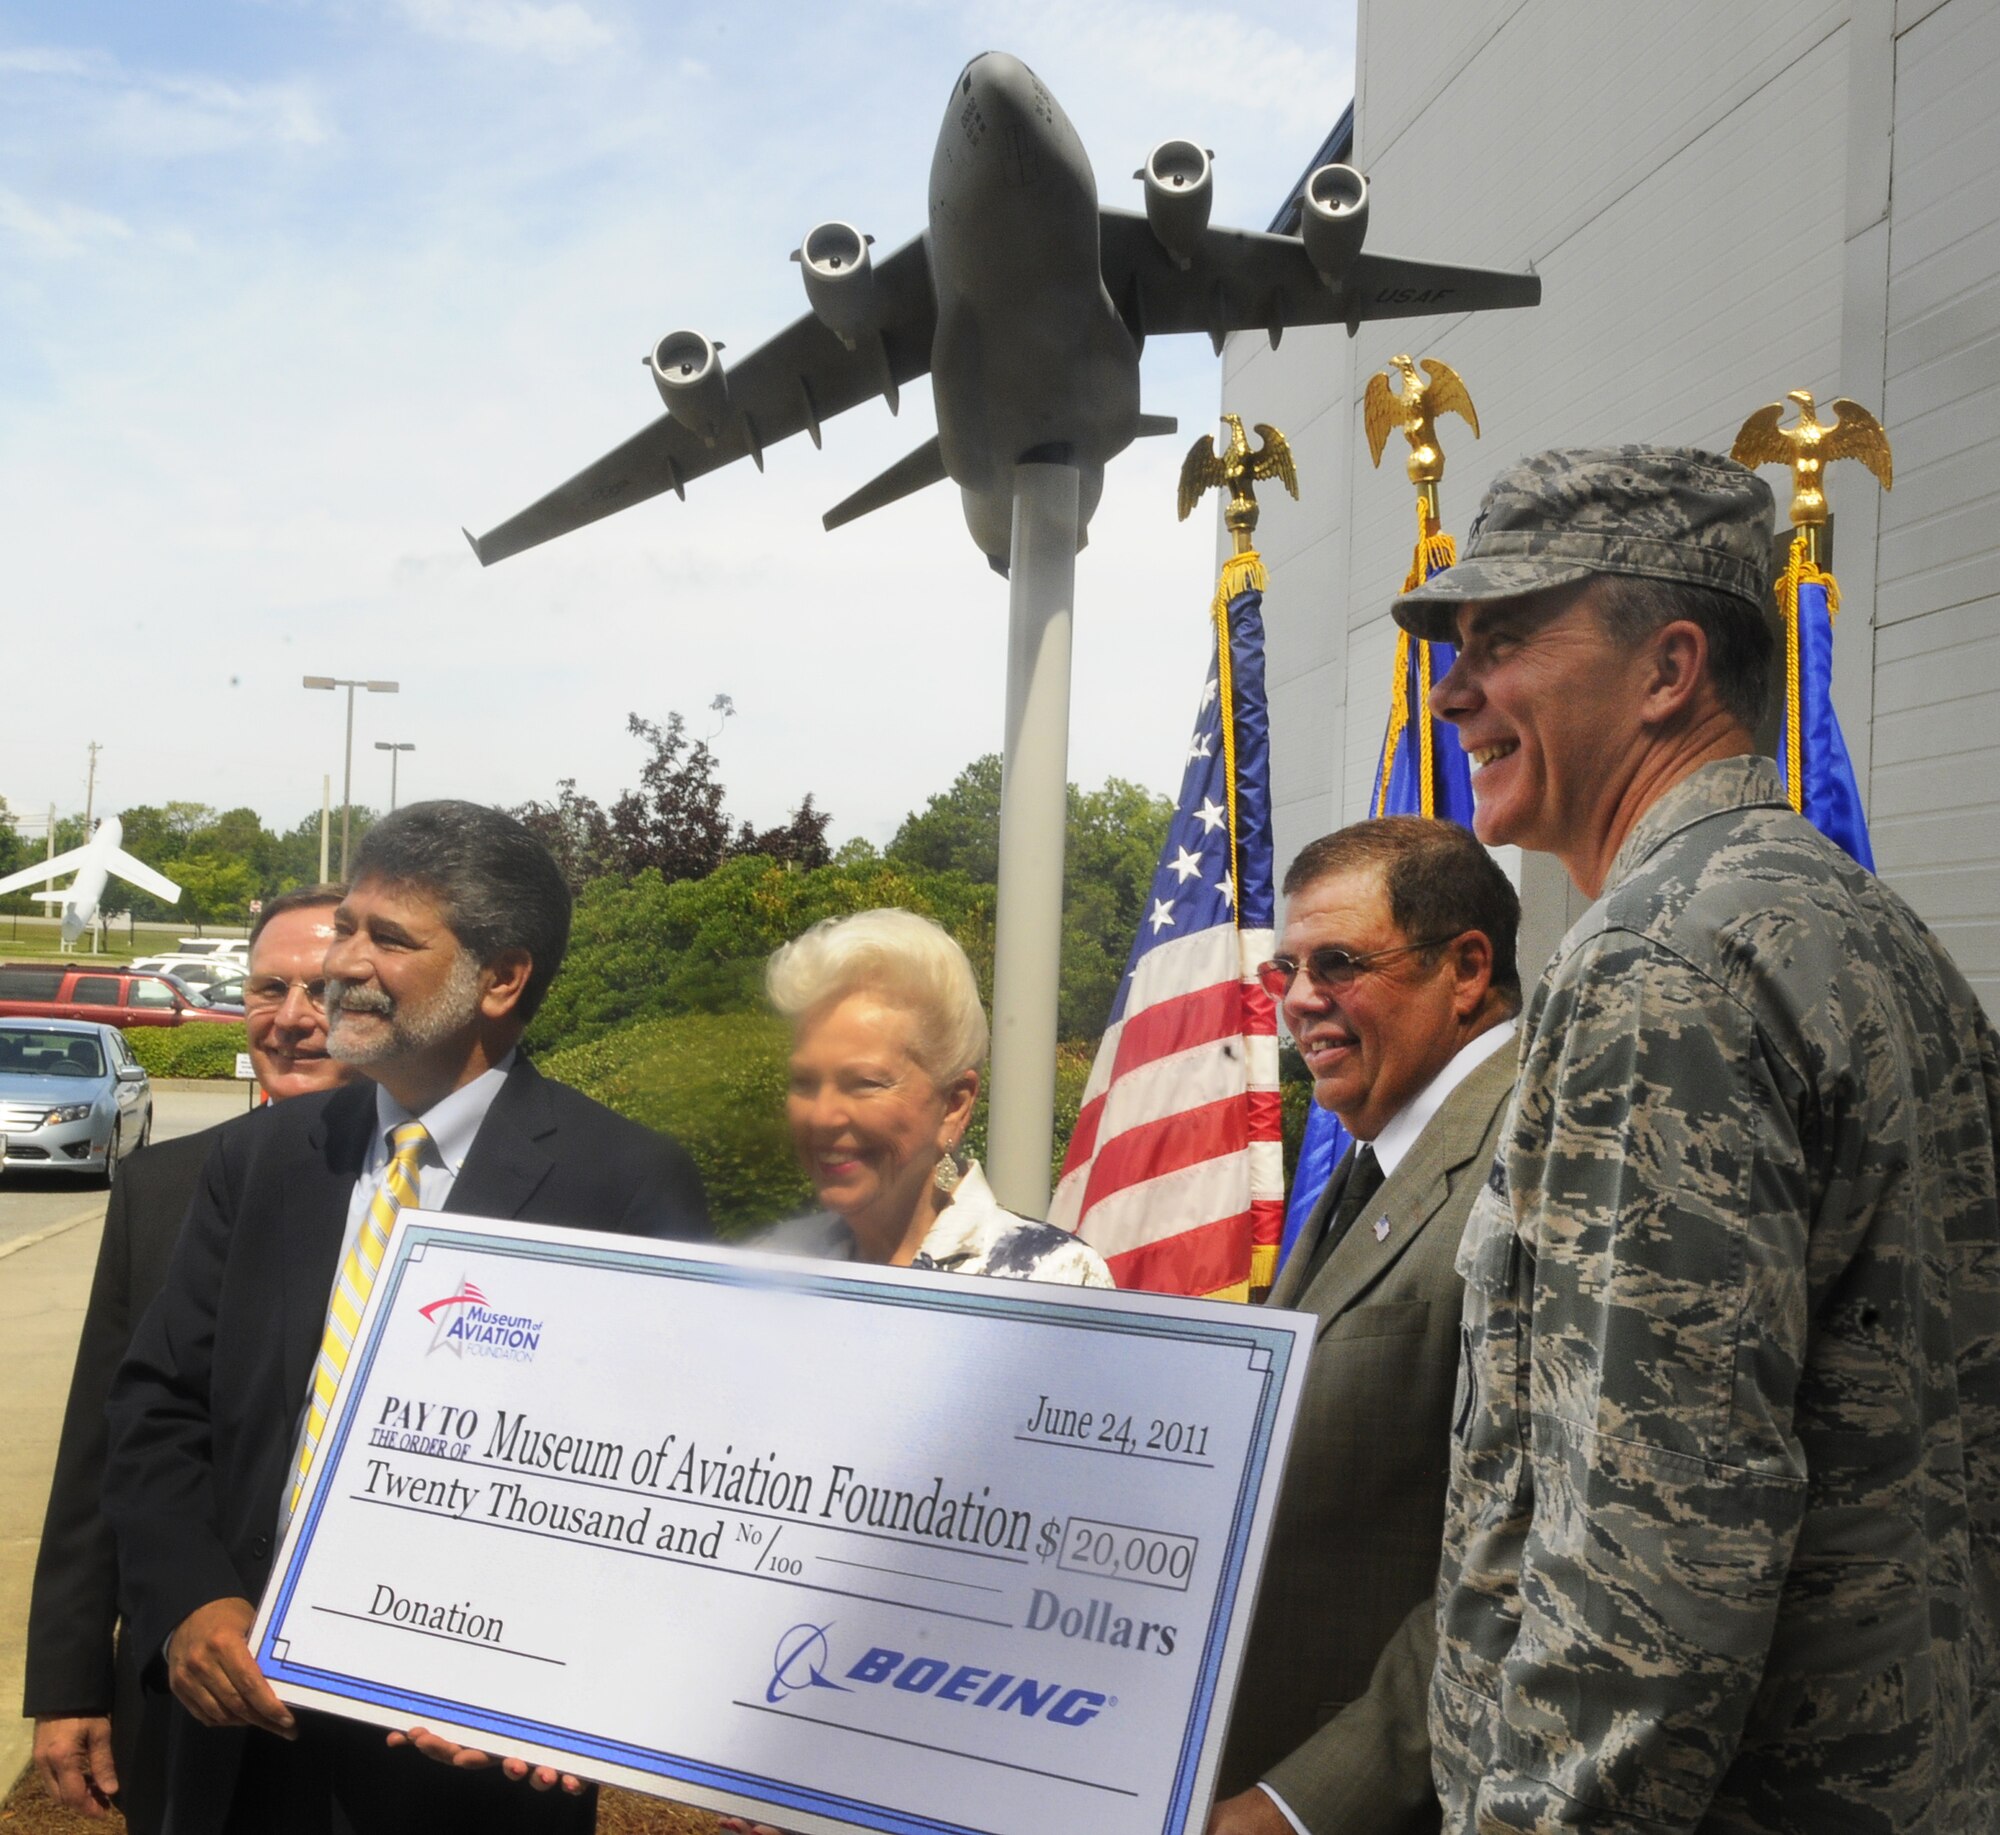 The Boeing Company donated a large model of the C-17 Globemaster III and $20,000 to the Museum of Aviation during a ceremony at the museum June 24. U. S. Air Force photo by Sue Sapp